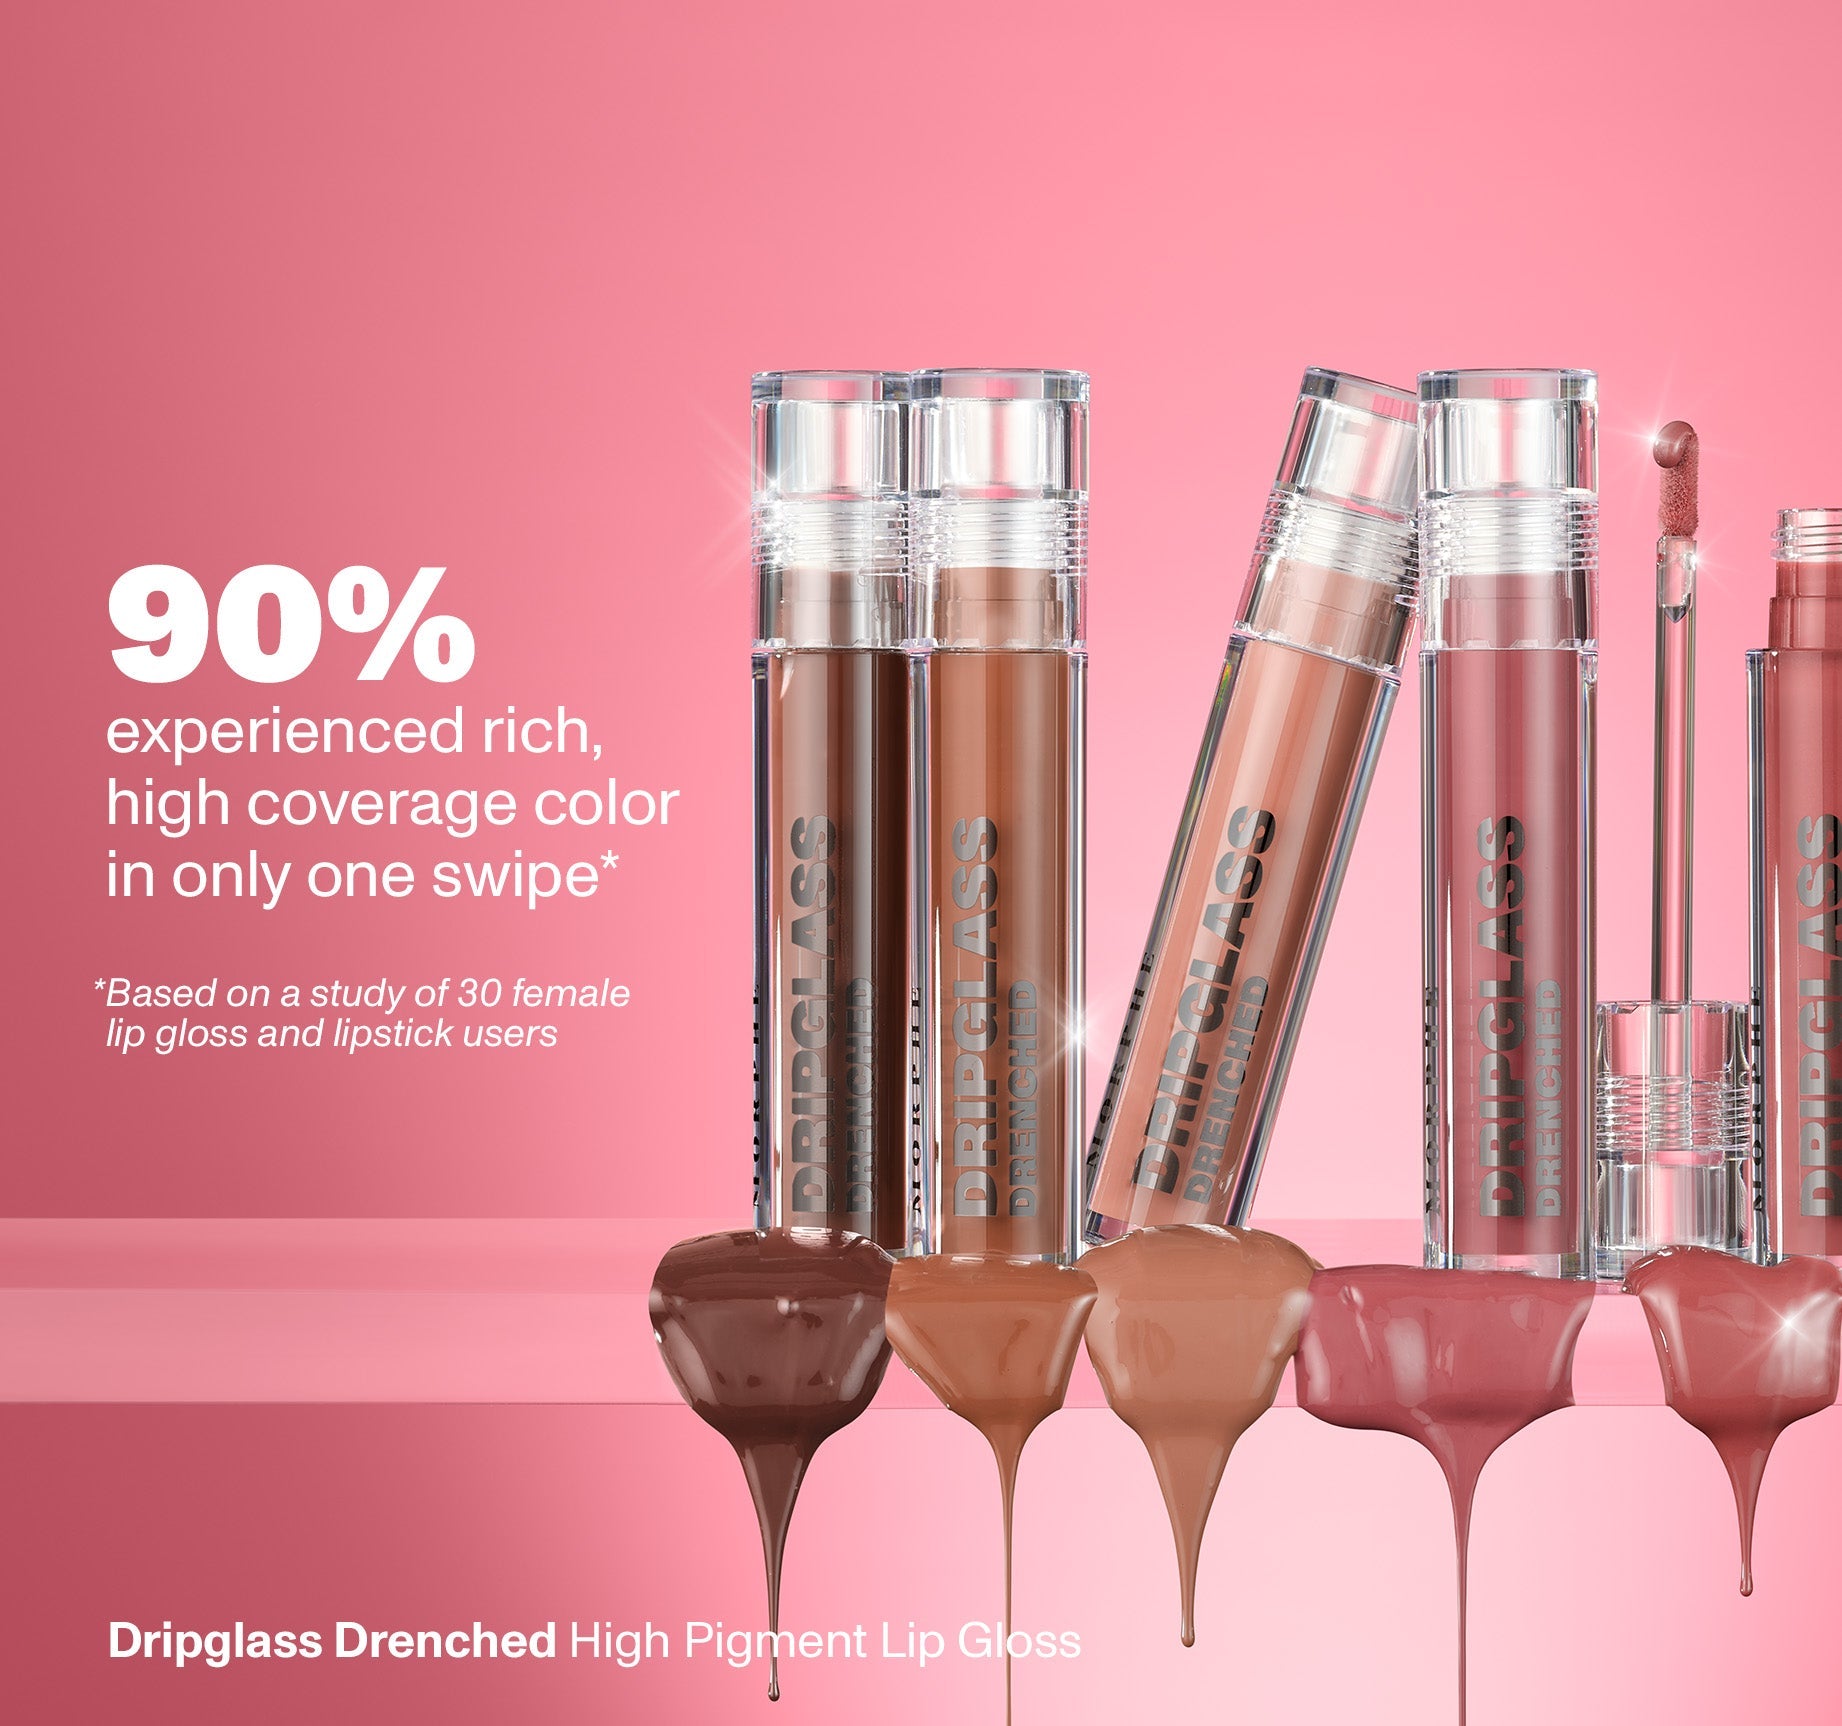 Dripglass Drenched High Pigment Lip Gloss - Wet Peach - Image 8